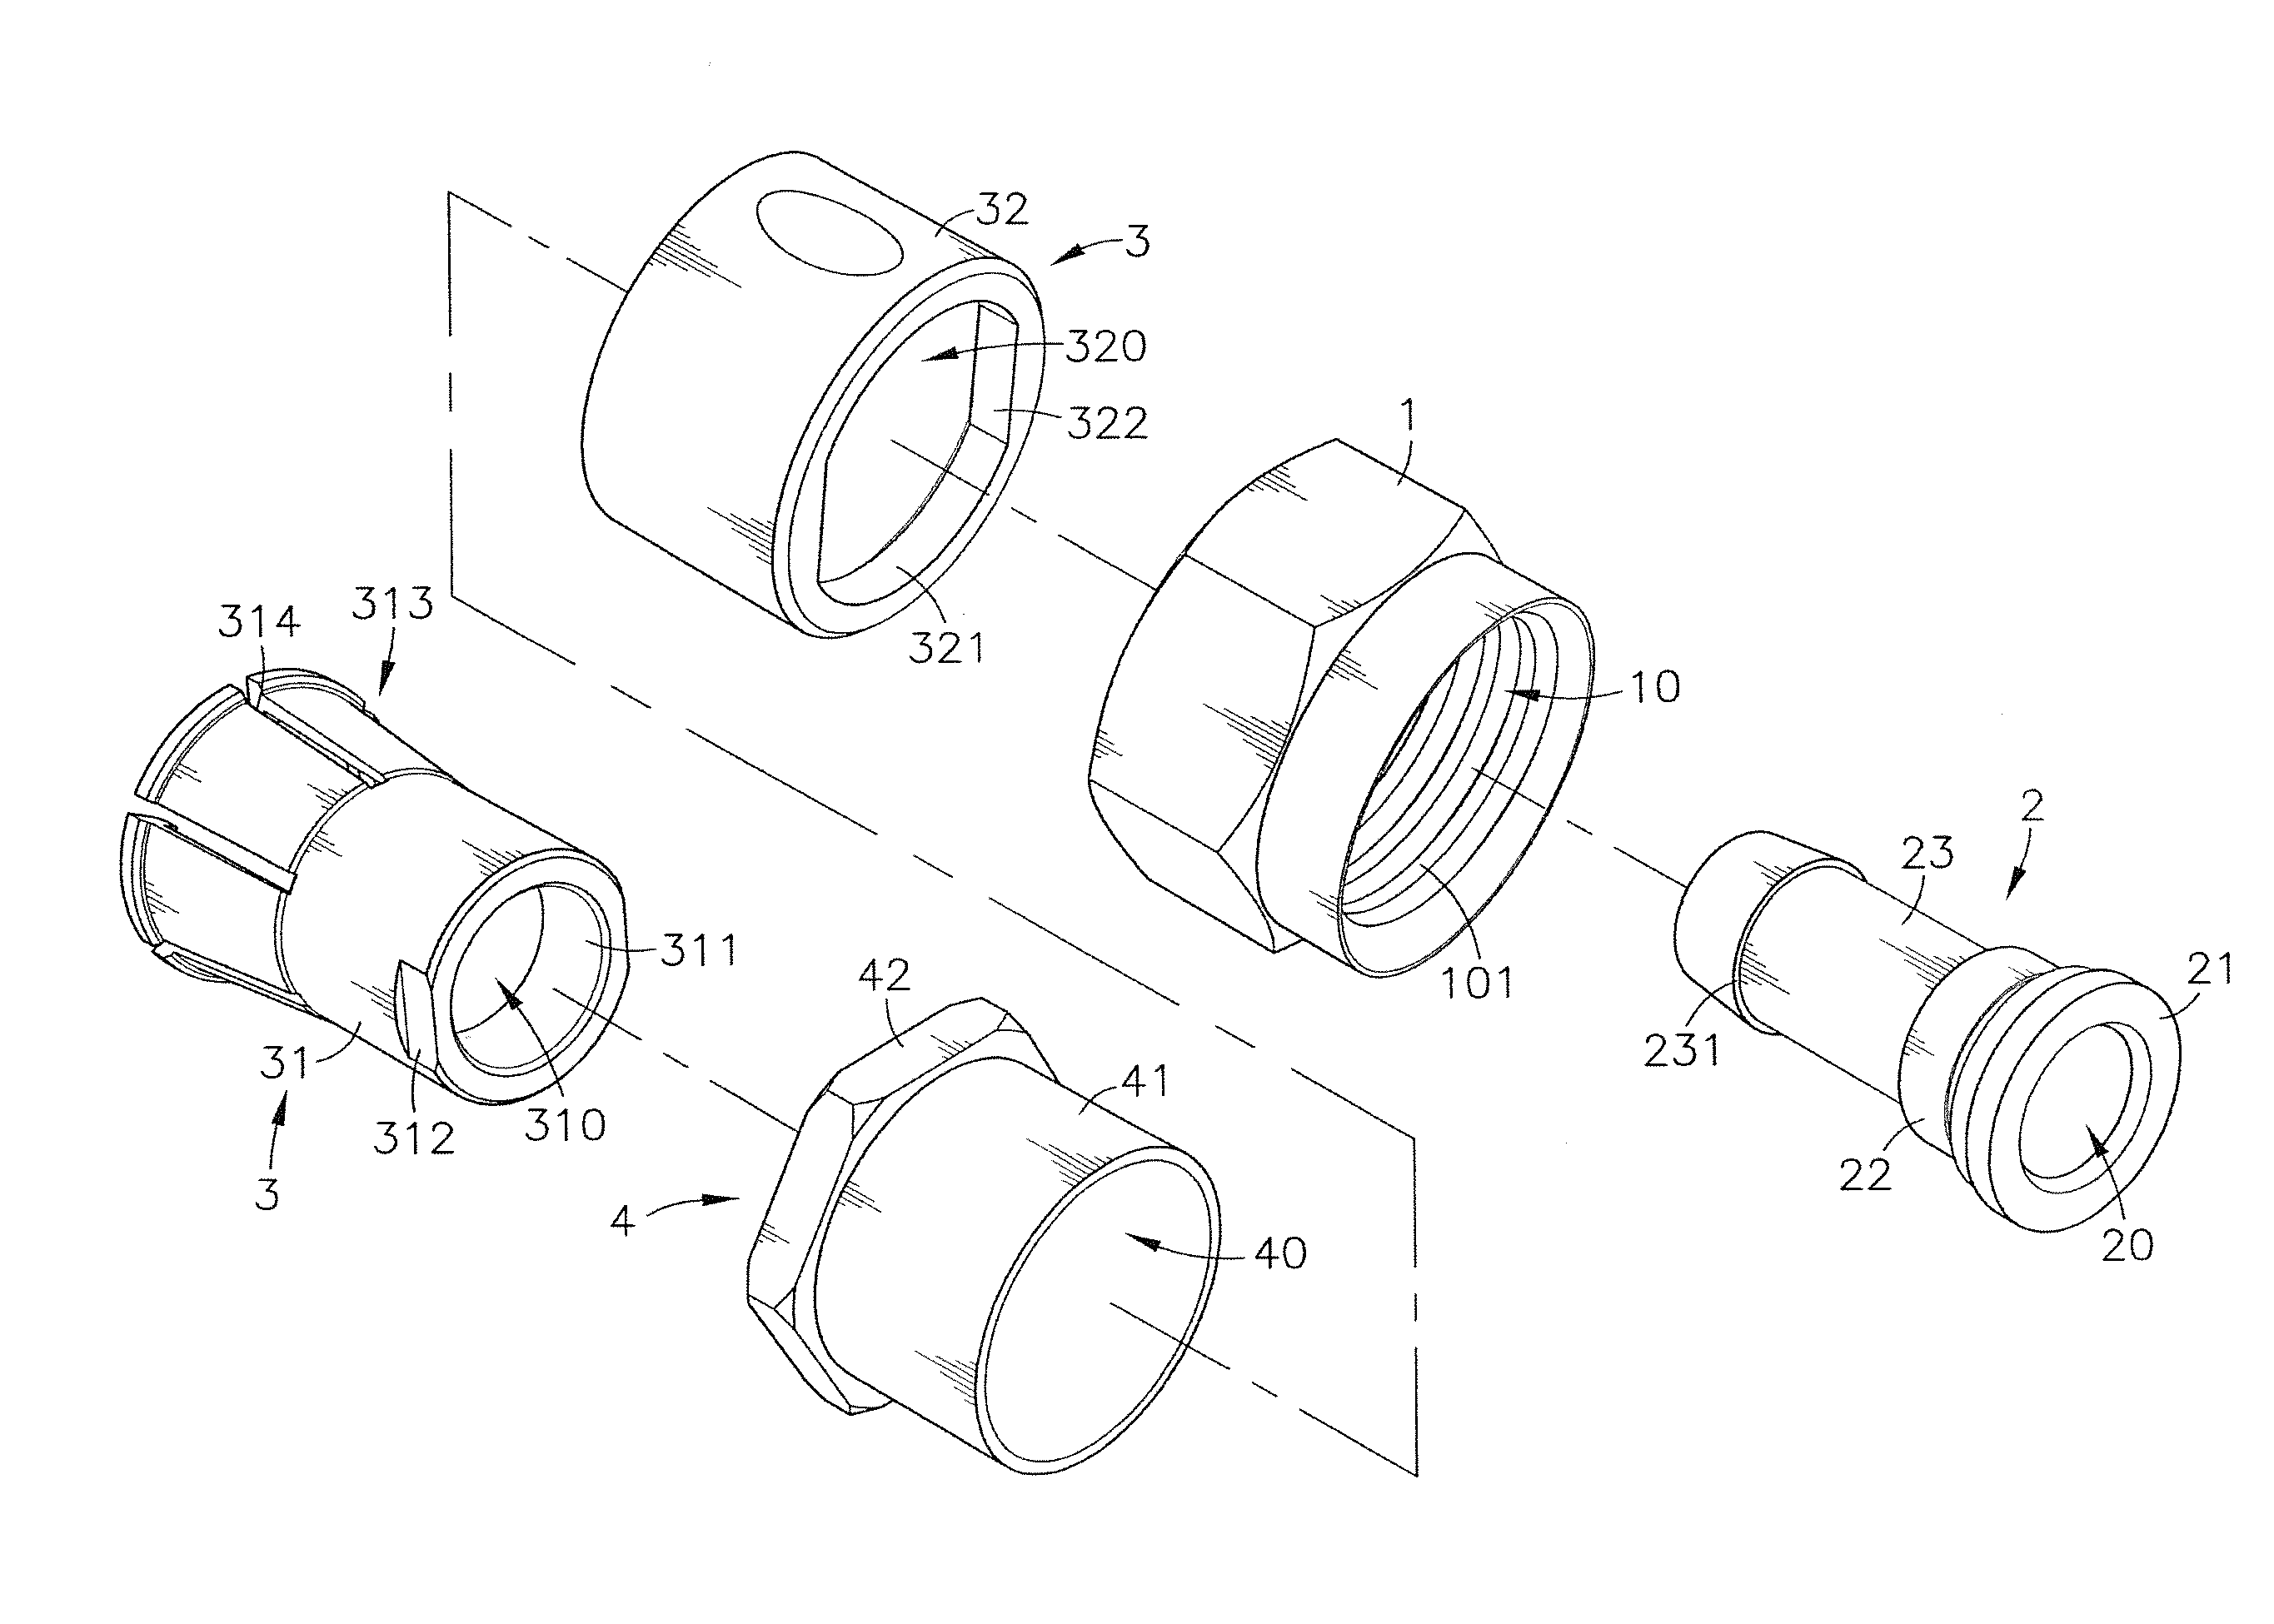 Electrical signal connector